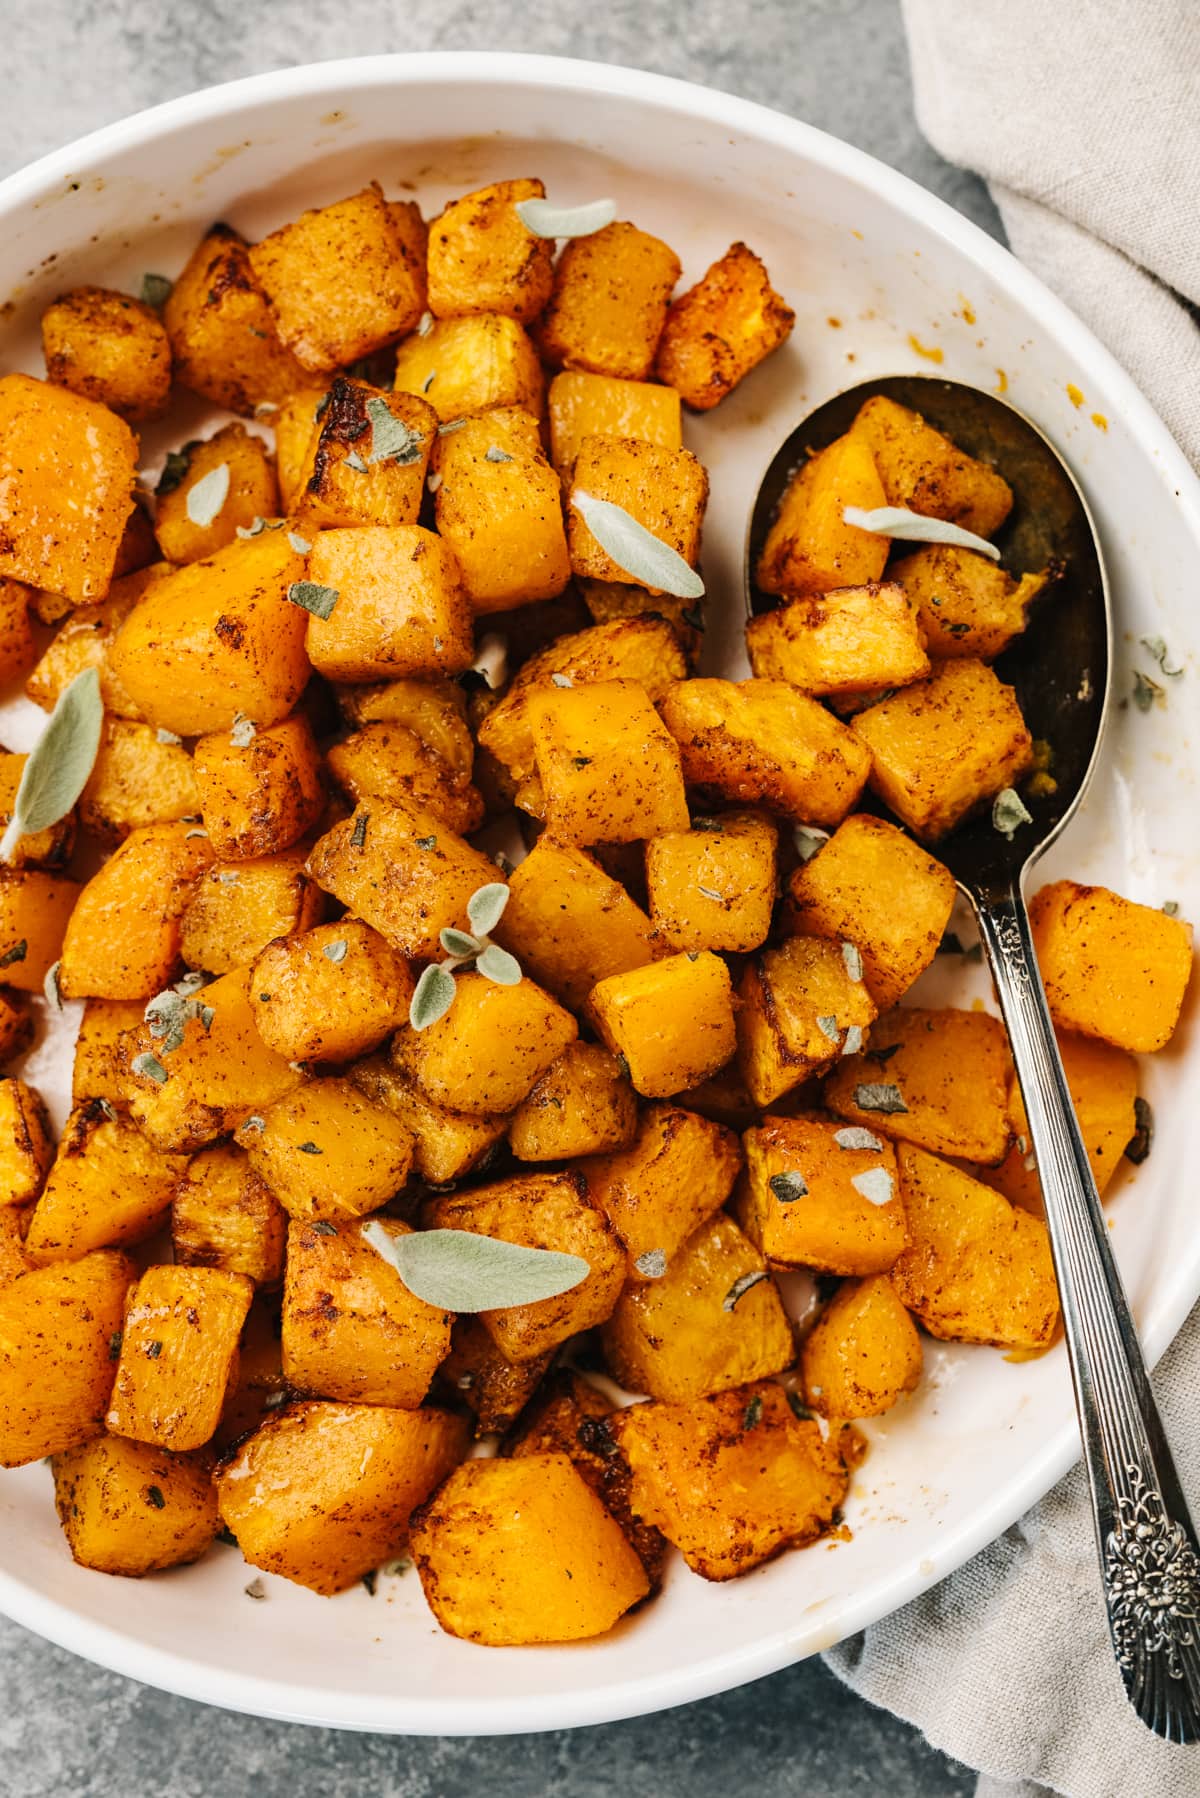 Air fryer butternut squash cubes in a white serving bowl with a vintage serving spoon and white linen napkin to the side.